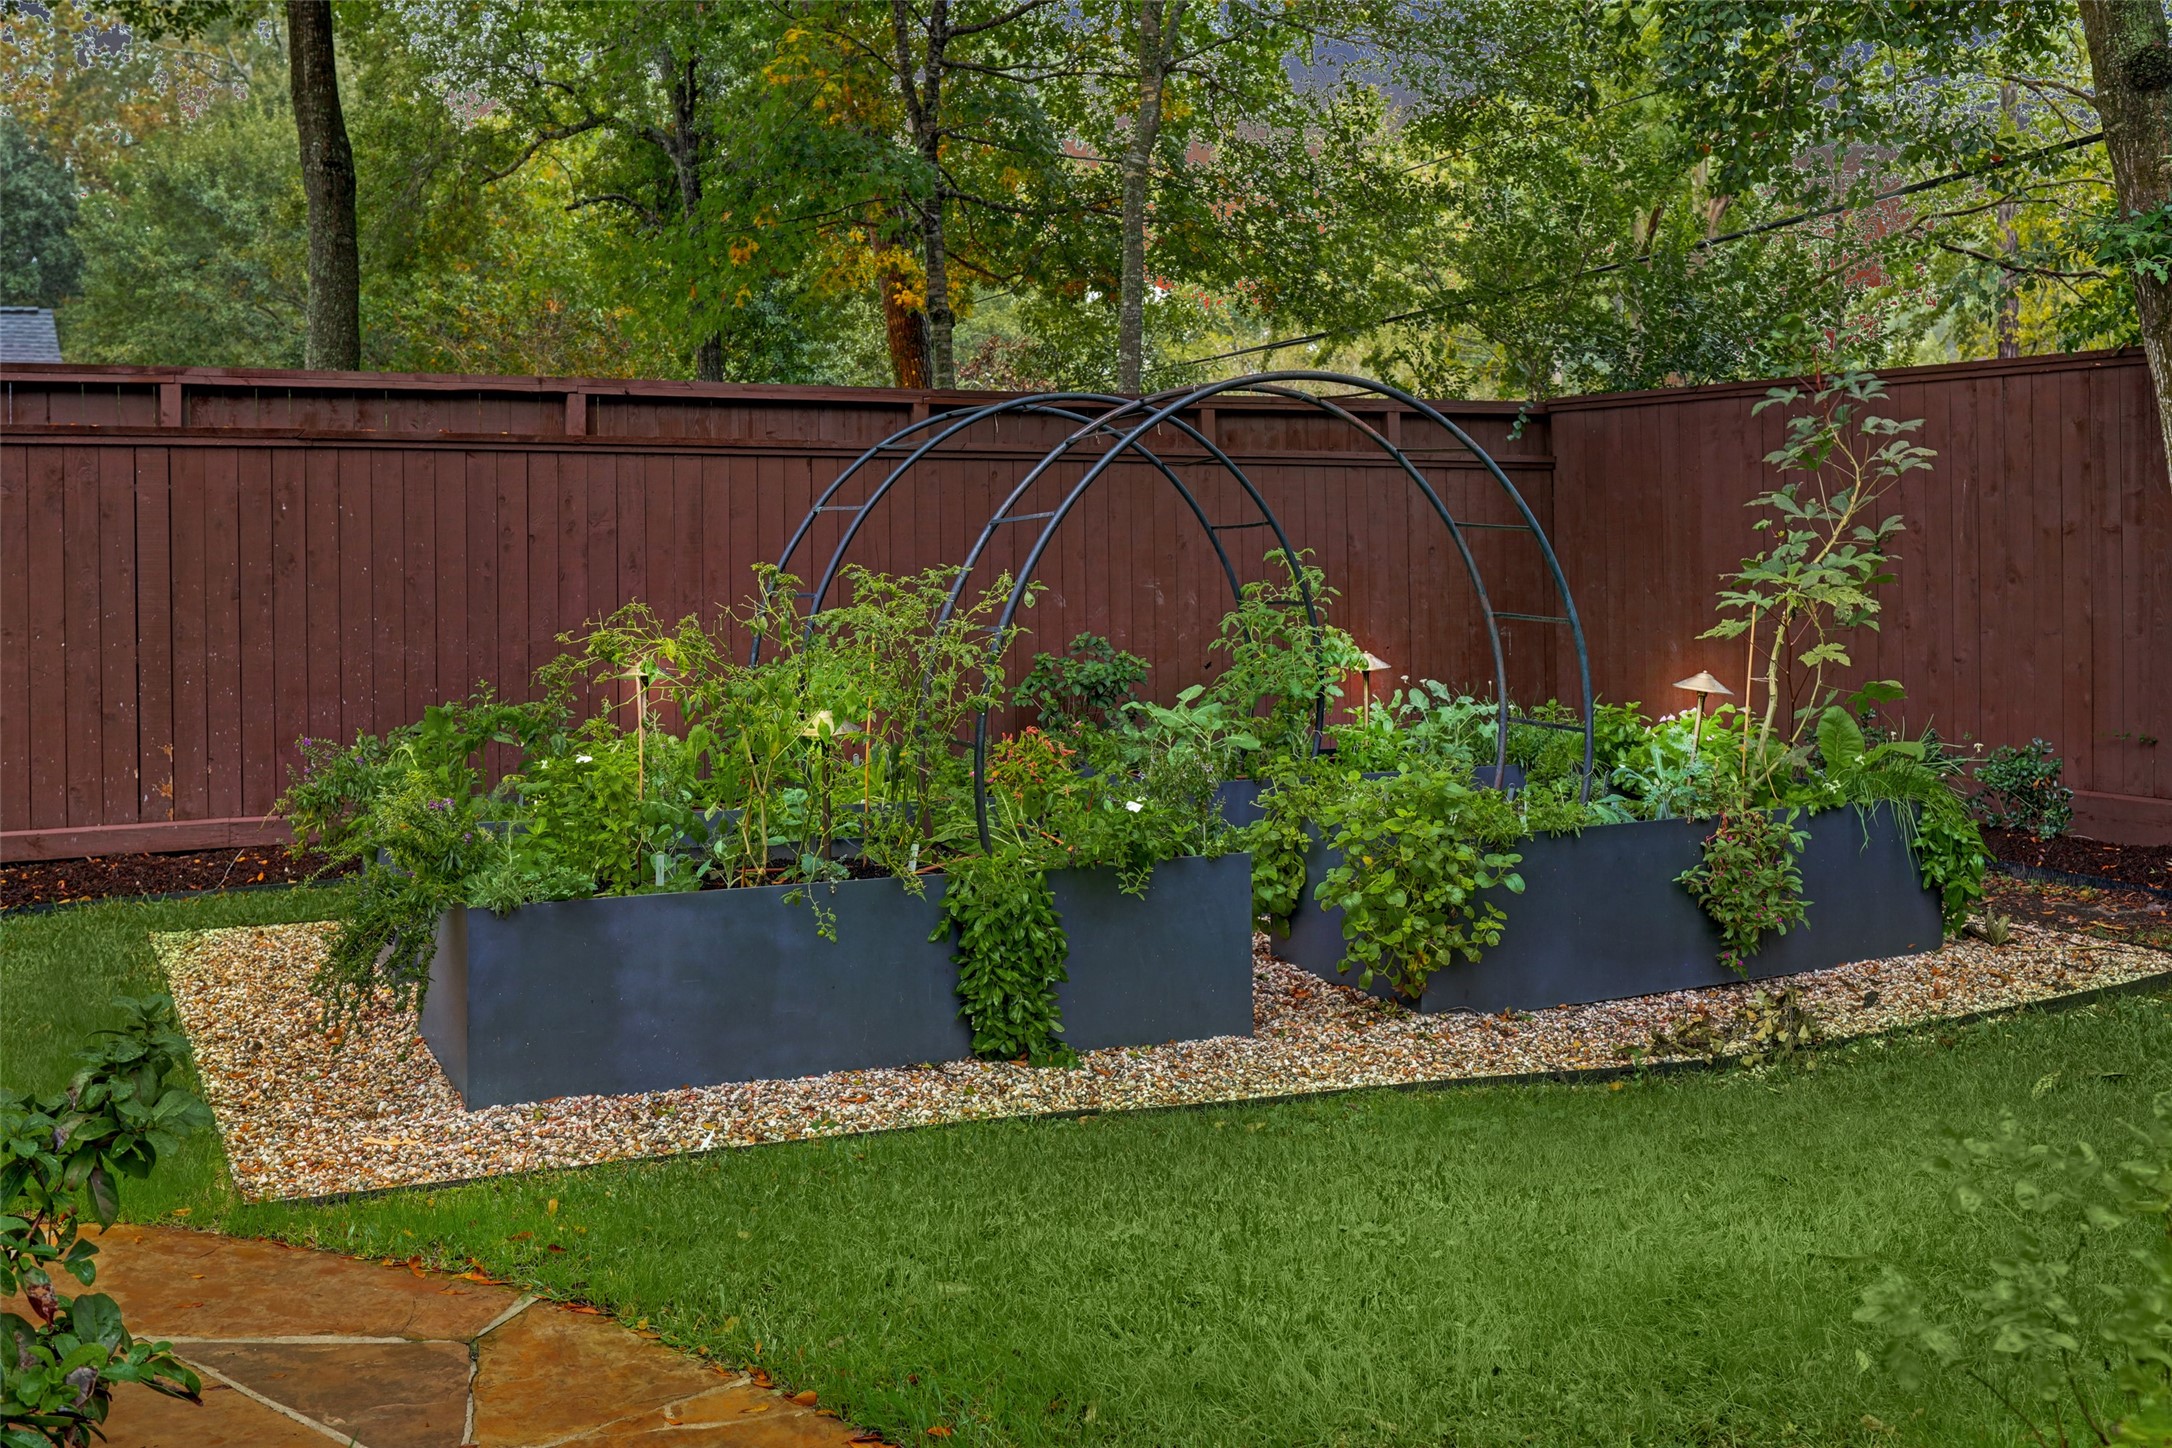 There is little more delectable than home-grown veggies.  Here is a custom designed Garden where you can grow your own! Just beyond the Garden is a whole house, natural gas-fired Generator so, in the event of a power outage, you don't have to eat your veggies in the dark!